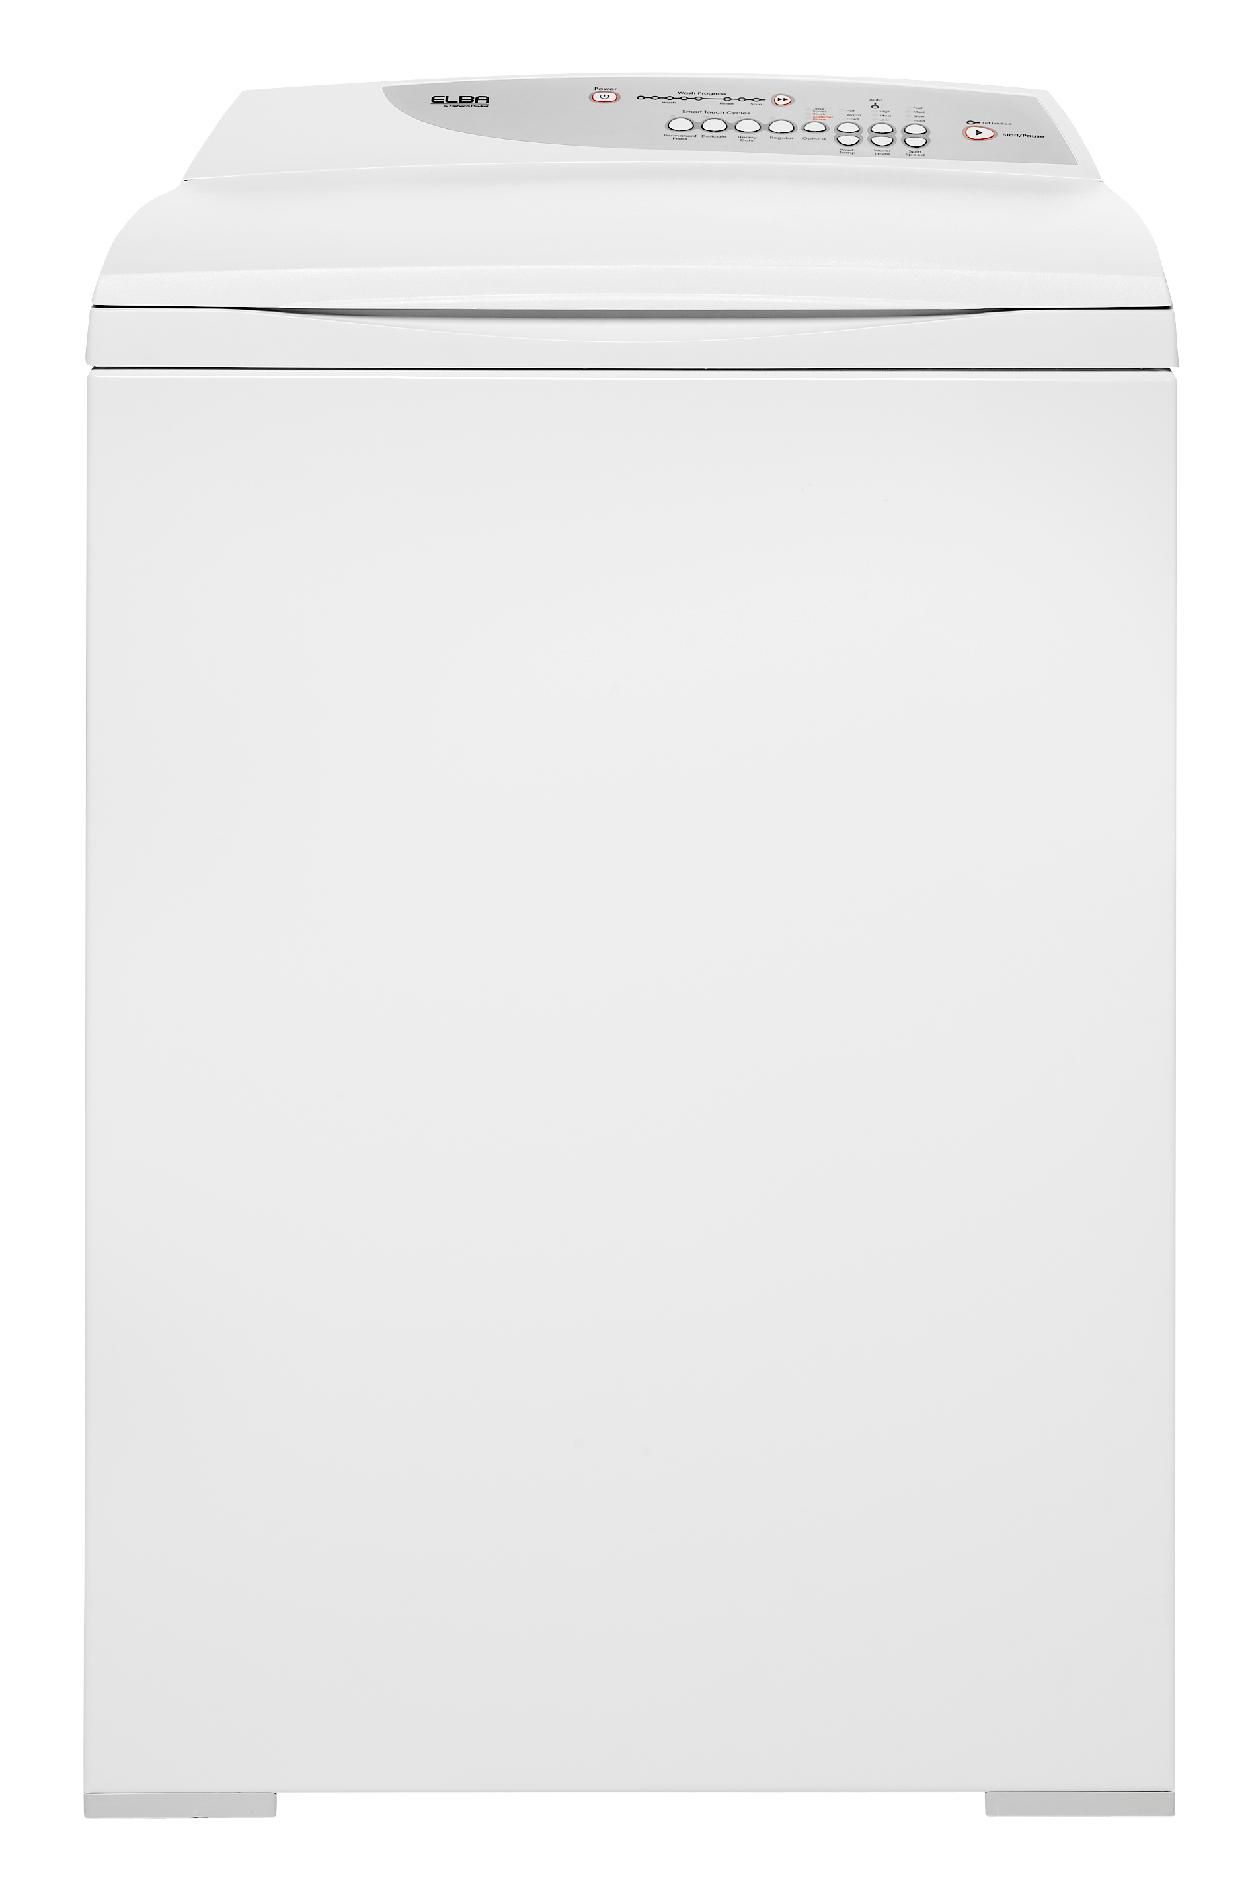 Fisher & Paykel Elba 3.7 cu ft Top-Load Washer - White